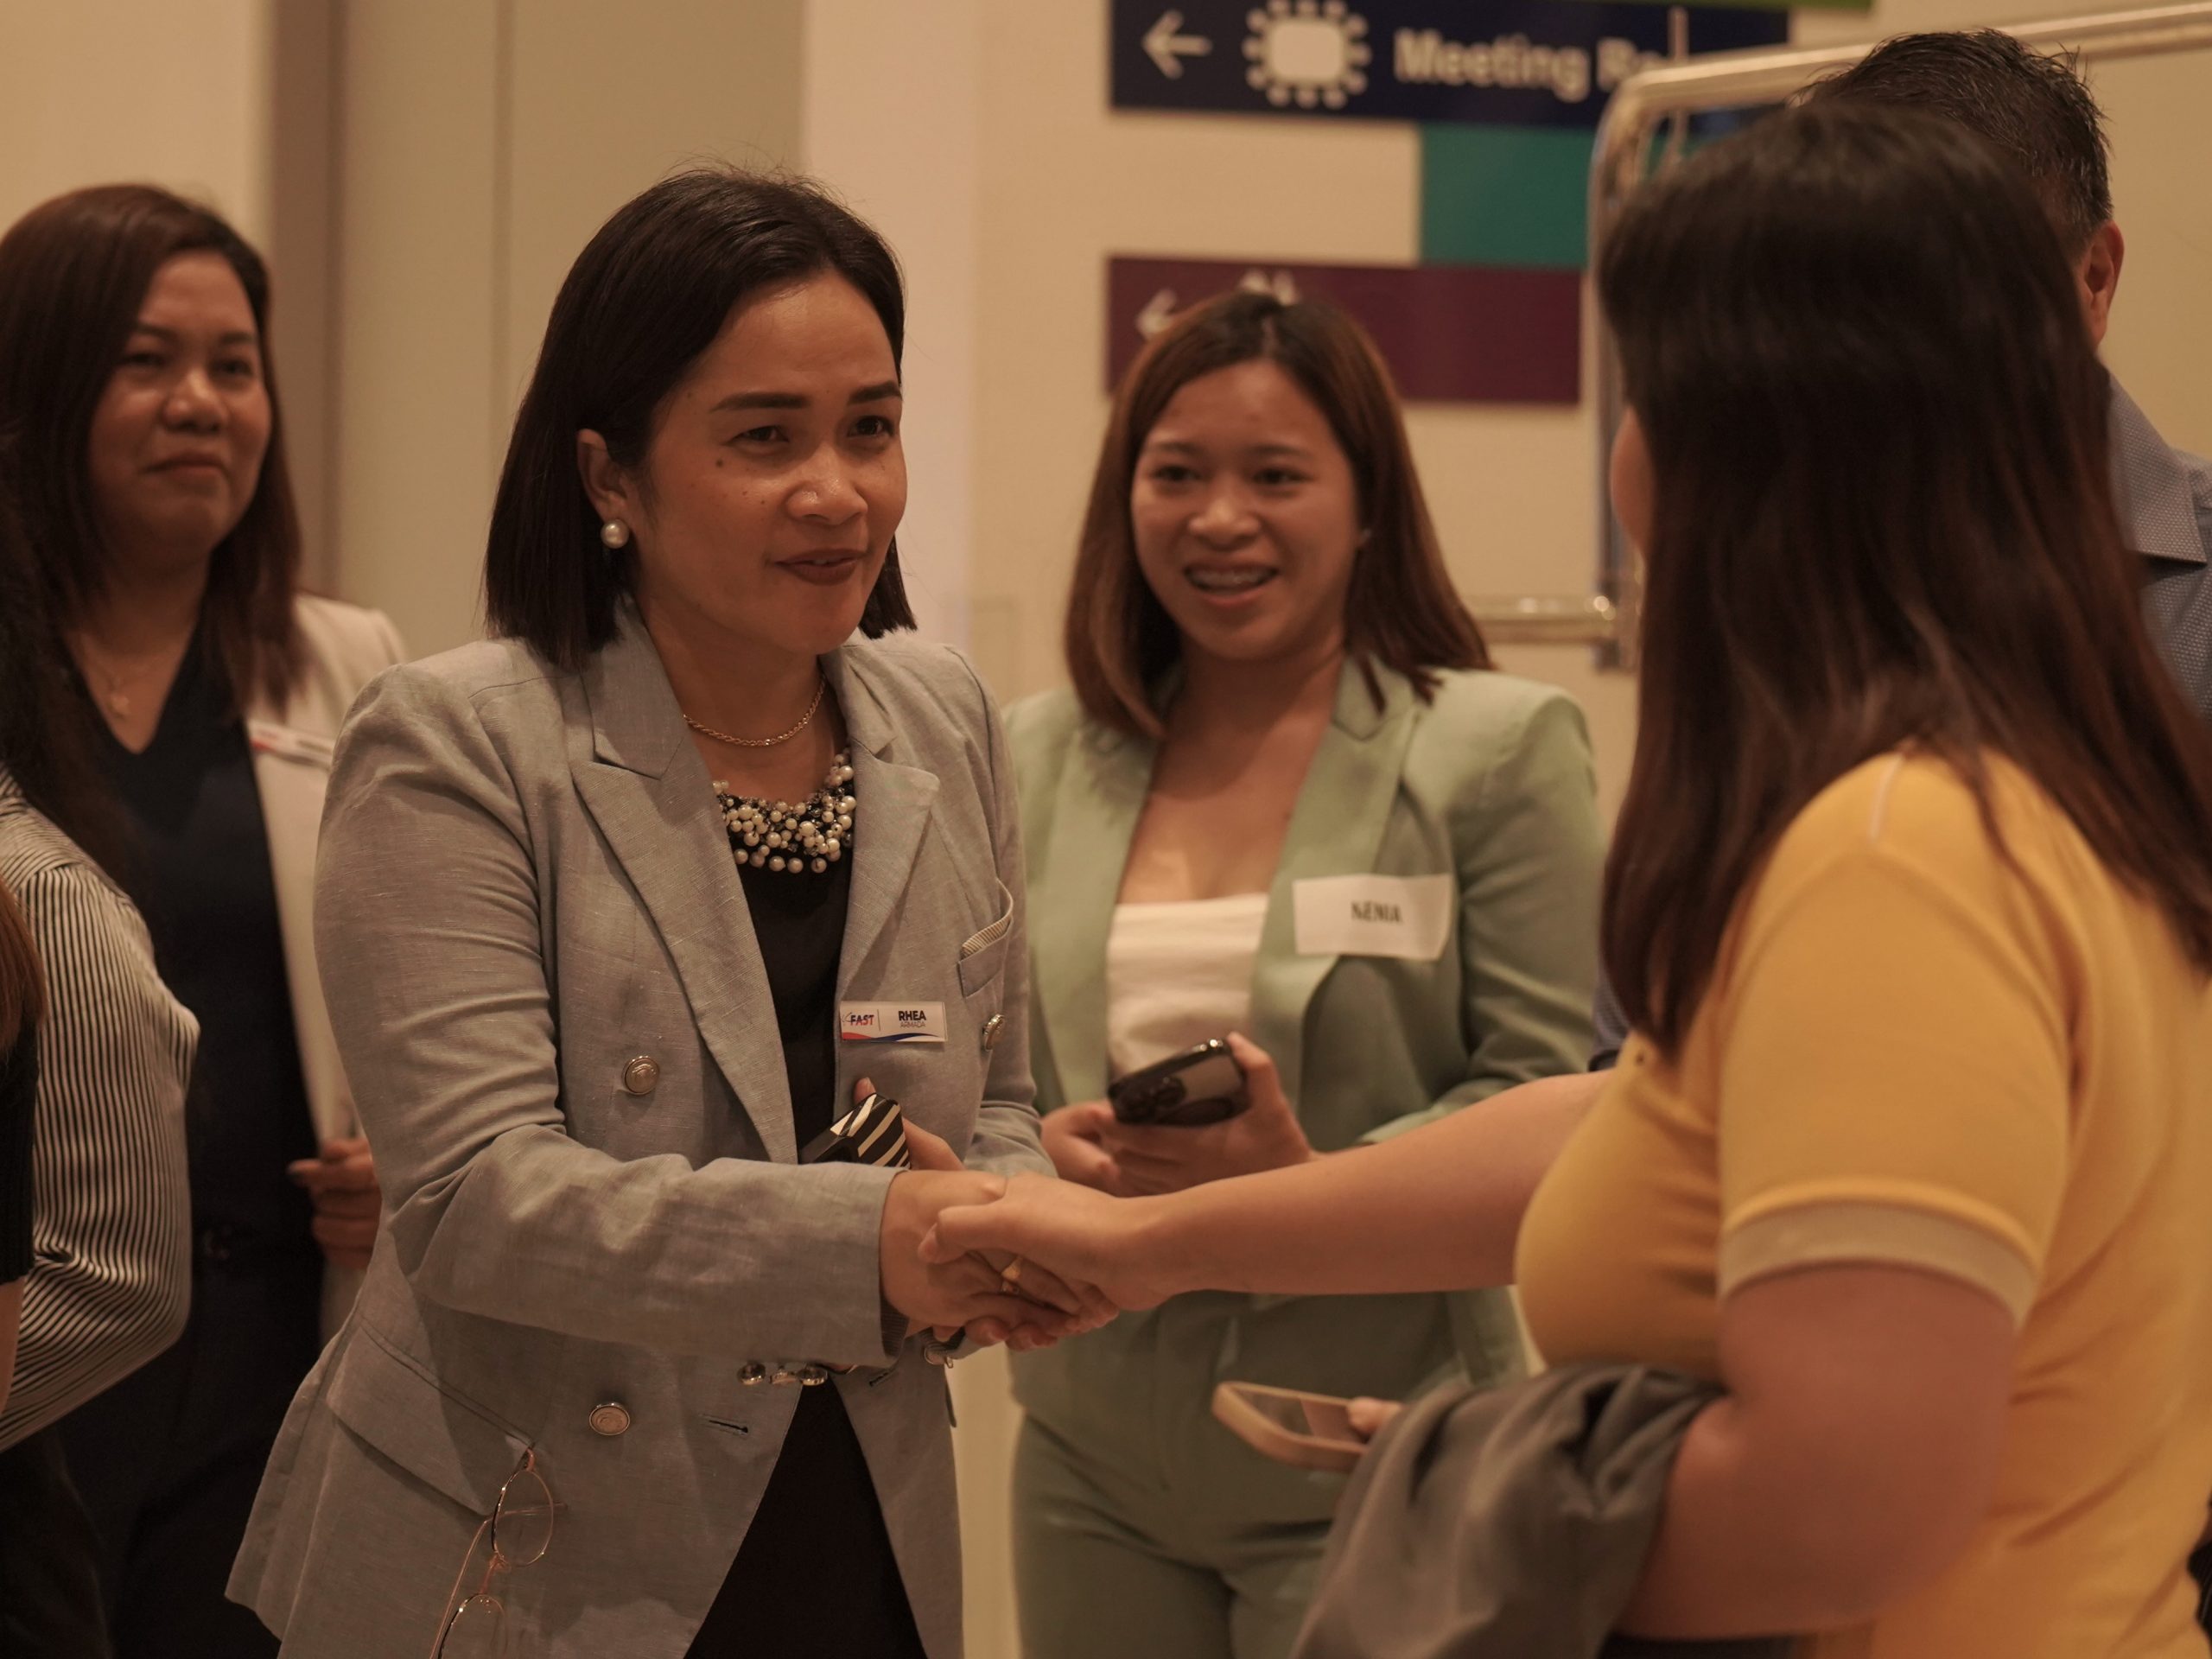 FAST Logistics Group, the leader in end-to-end logistics in the Philippines, has launched its Solutions Roadshow in Iloilo City, the inaugural leg of a series to be conducted across the Visayas and Mindanao, to drive innovation forward and bring topnotch services directly to the doorsteps of growing enterprises in Visayas and Mindanao.